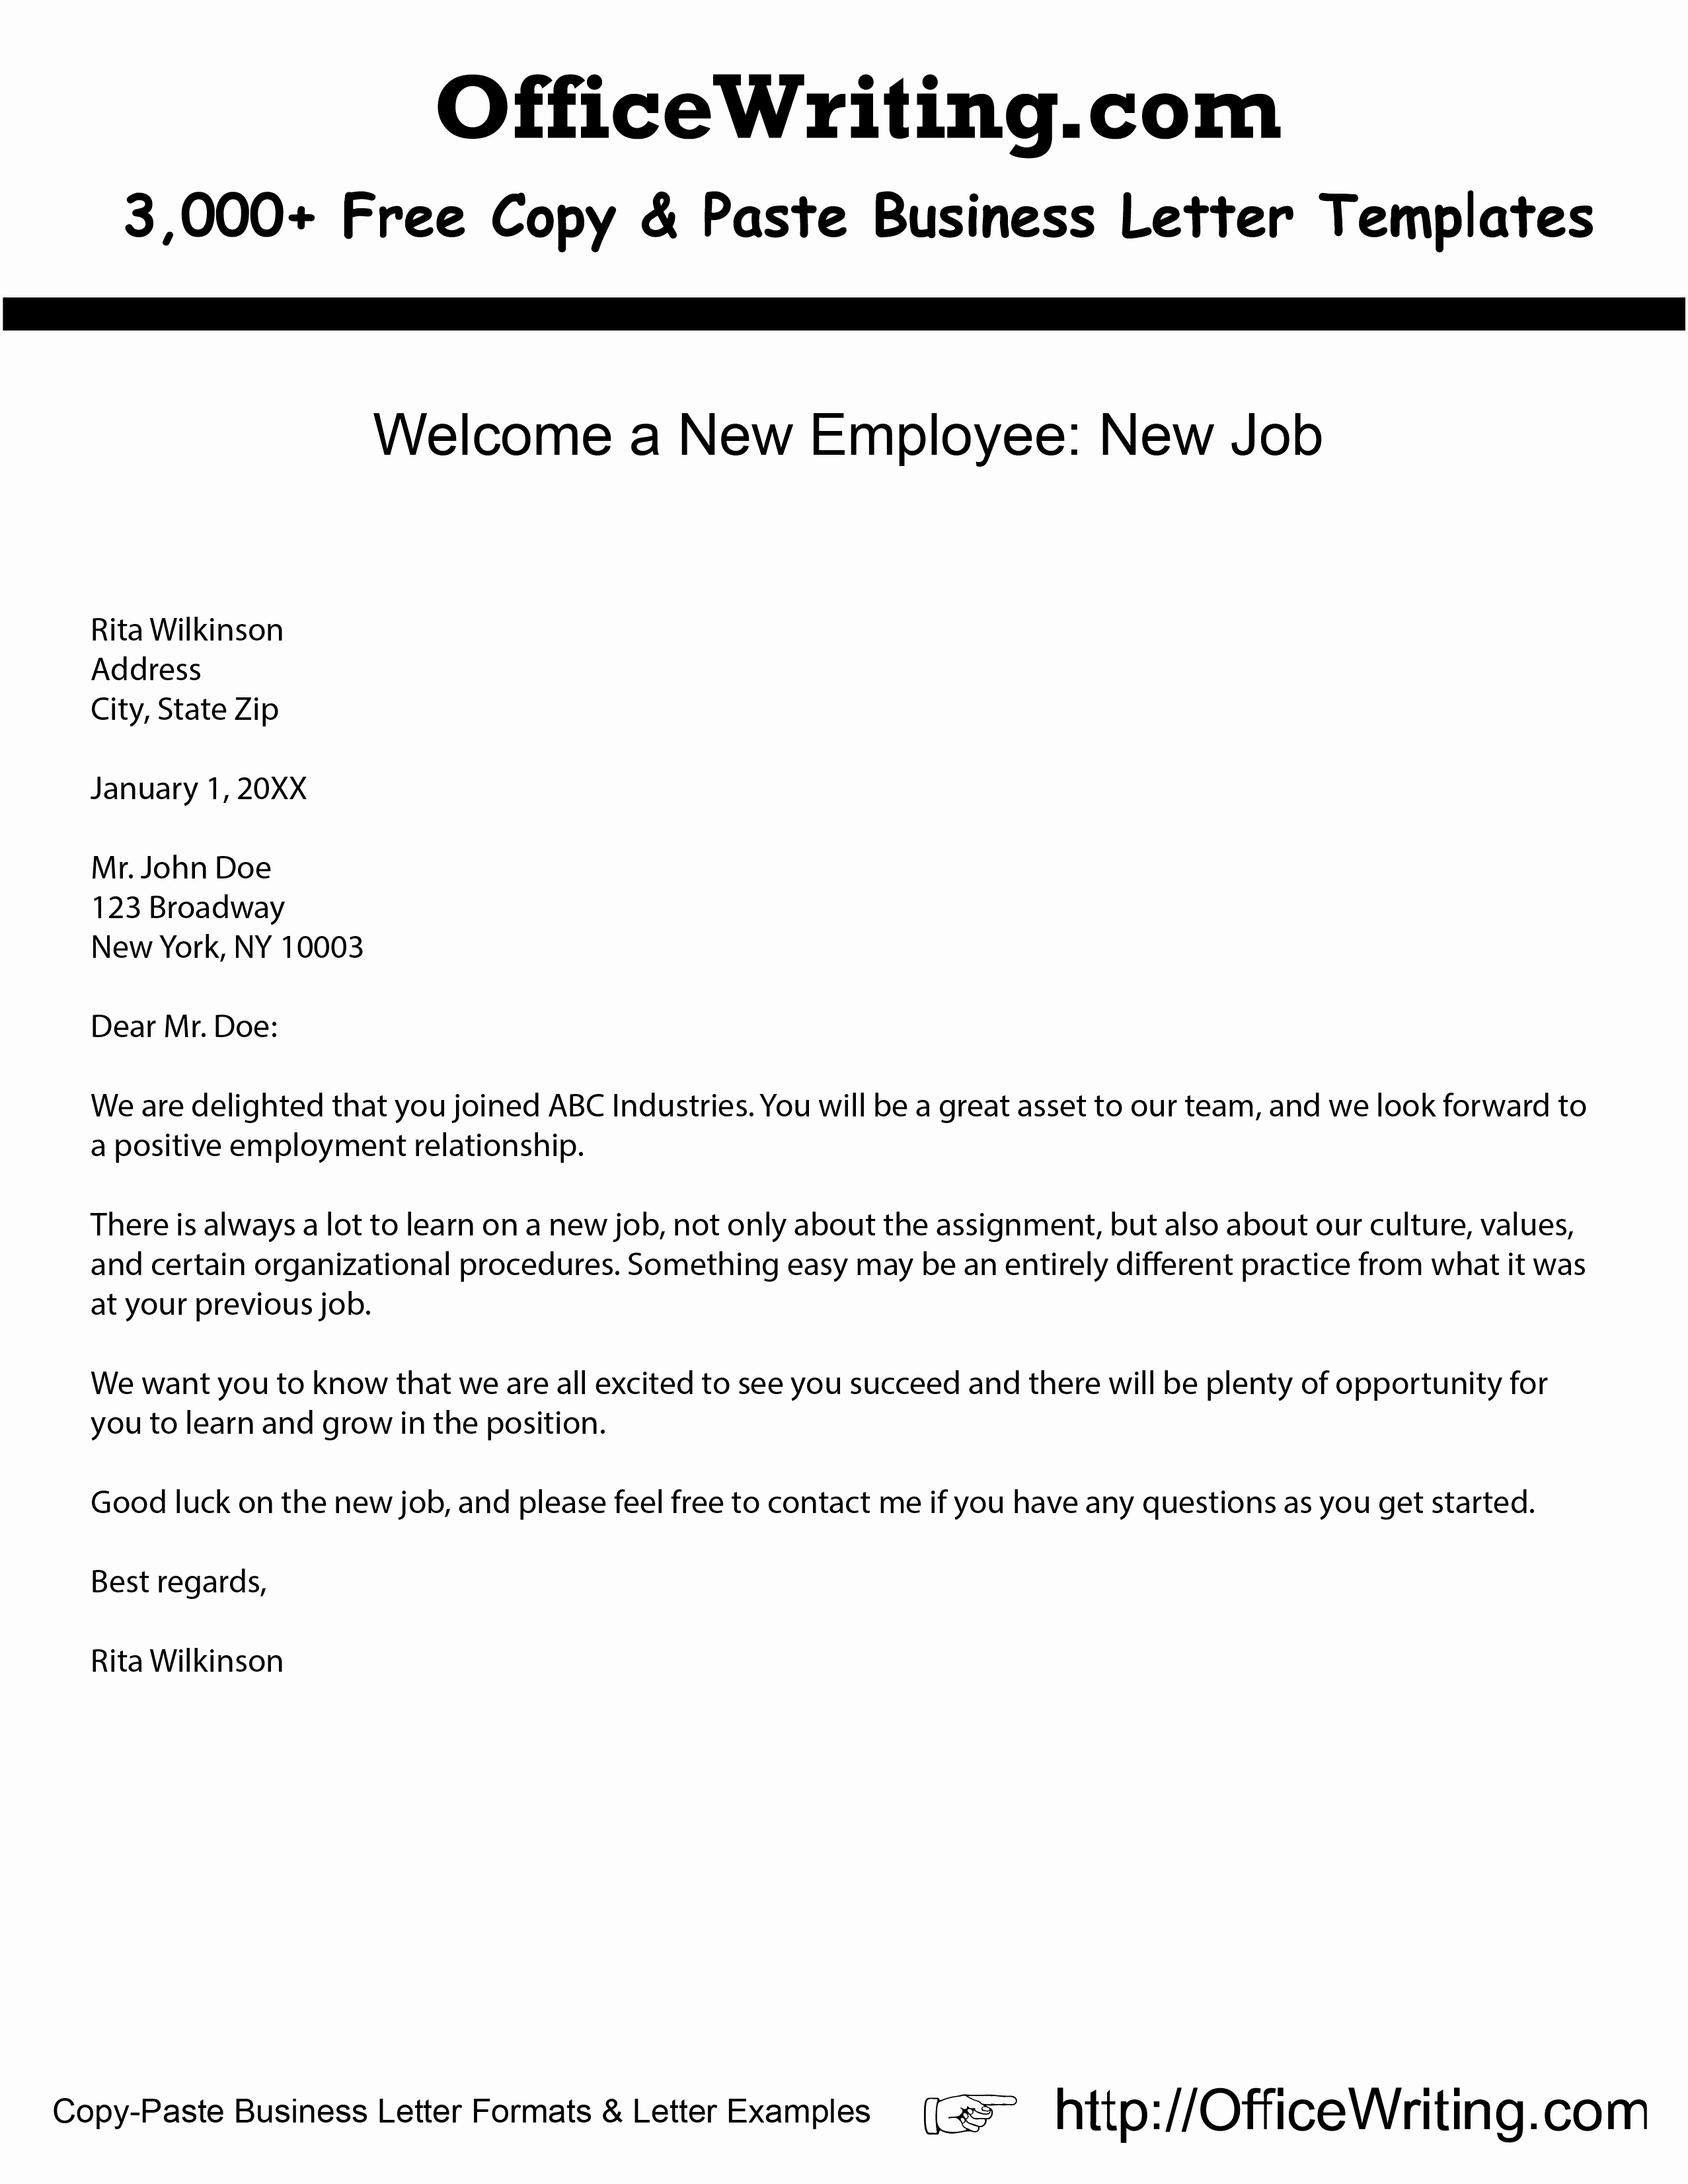 Welcome Letter to New Employee Inspirational Pin by Megan Koski On Work